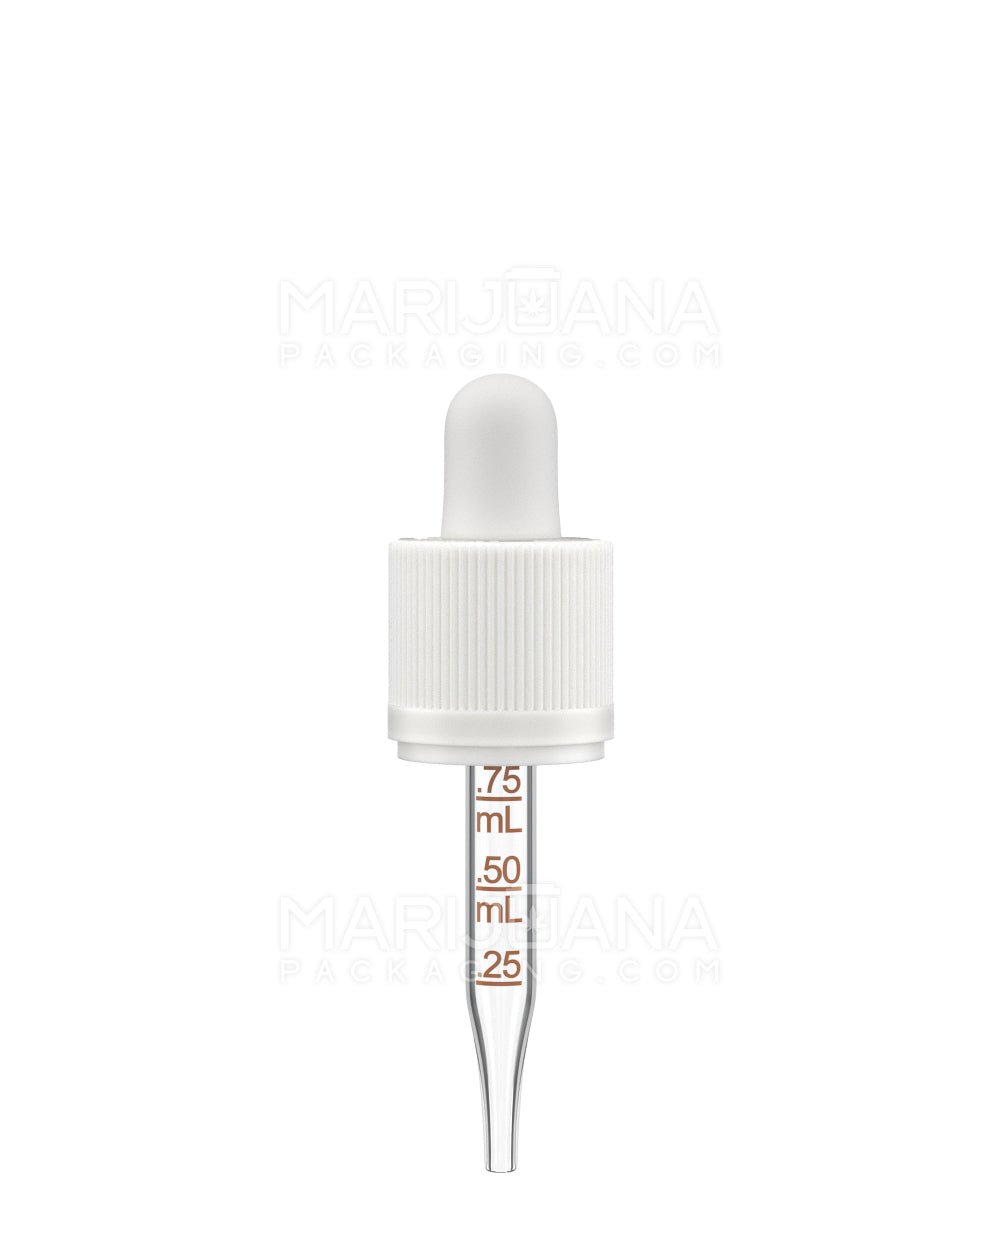 Child Resistant & Tamper Evident | White Graduated Ribbed Glass Dropper Cap | 15mL - 0.75mL - 468 Count - 1